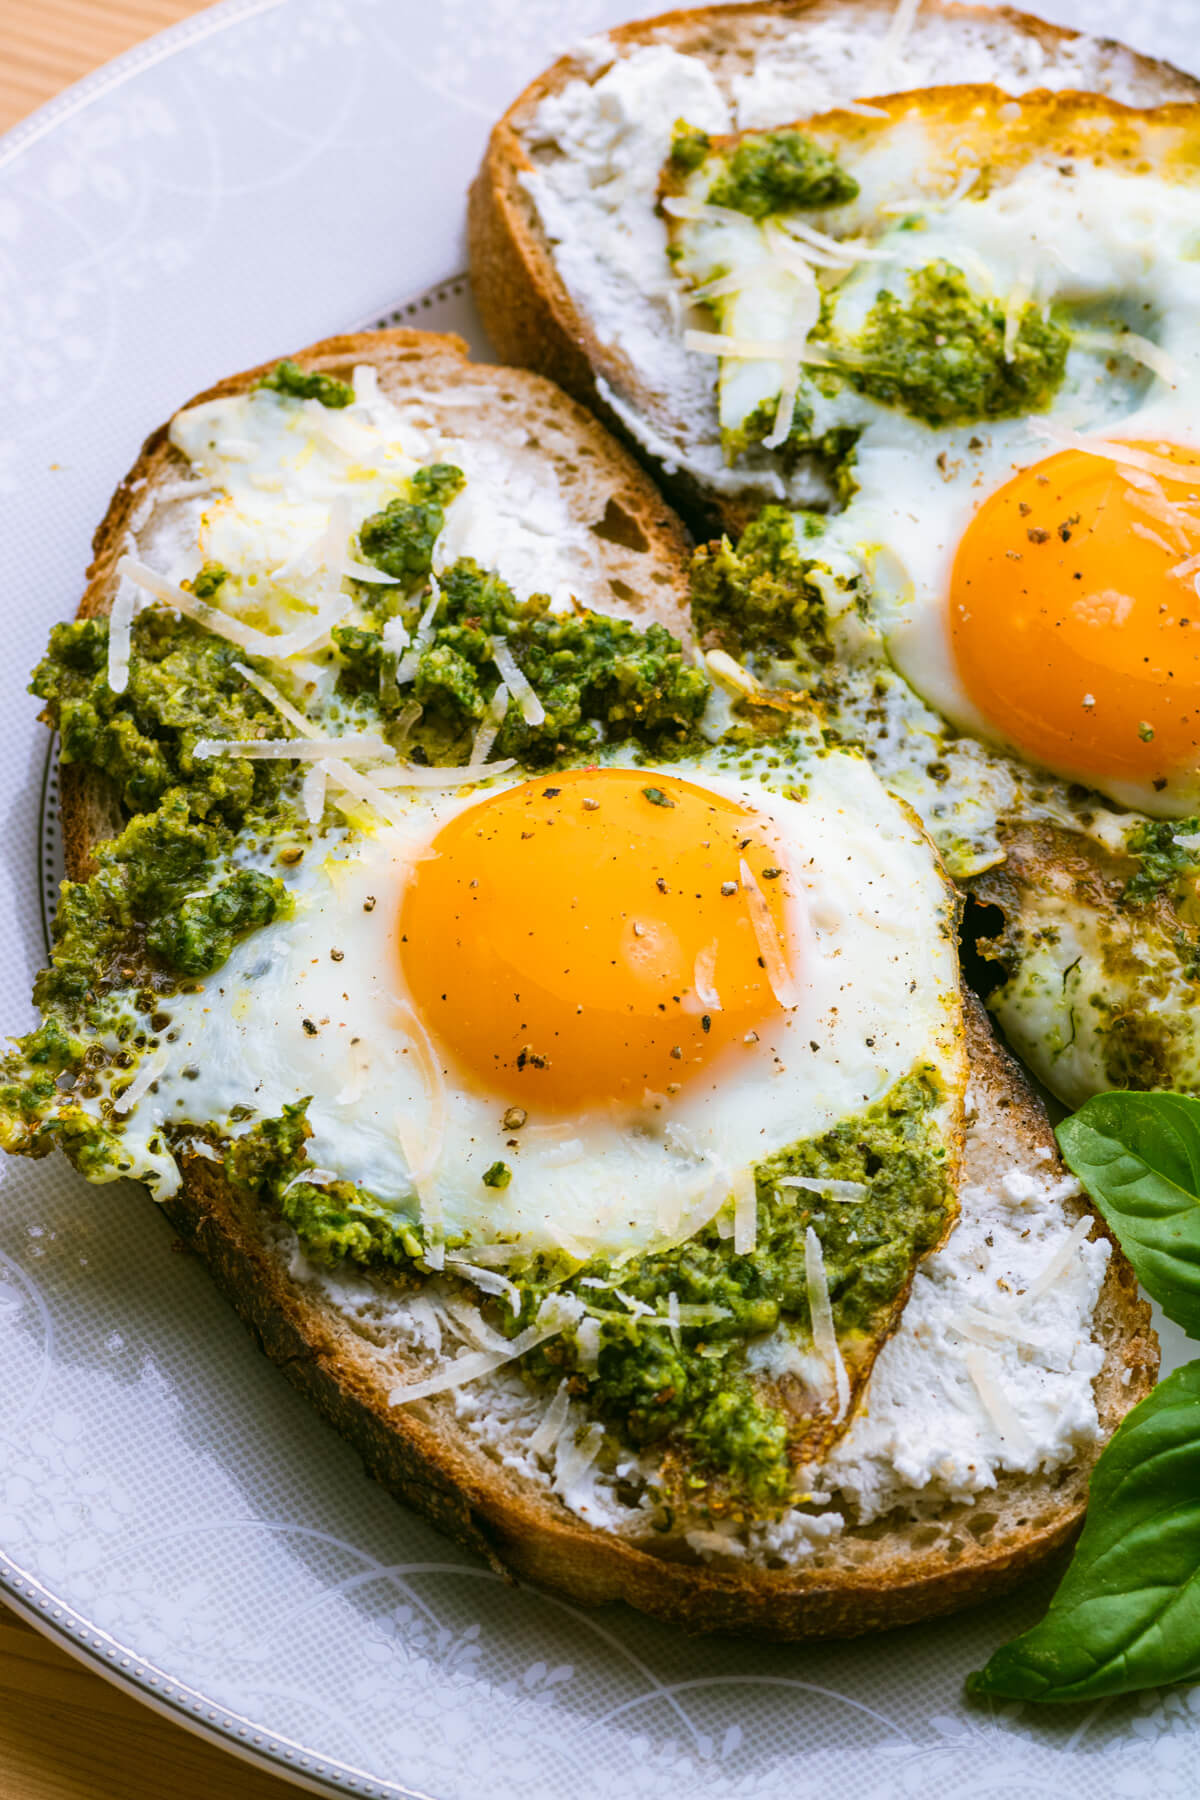 Fried Pesto Eggs on toast with sunny side up yellow egg yolks and vibrant green basil pesto.